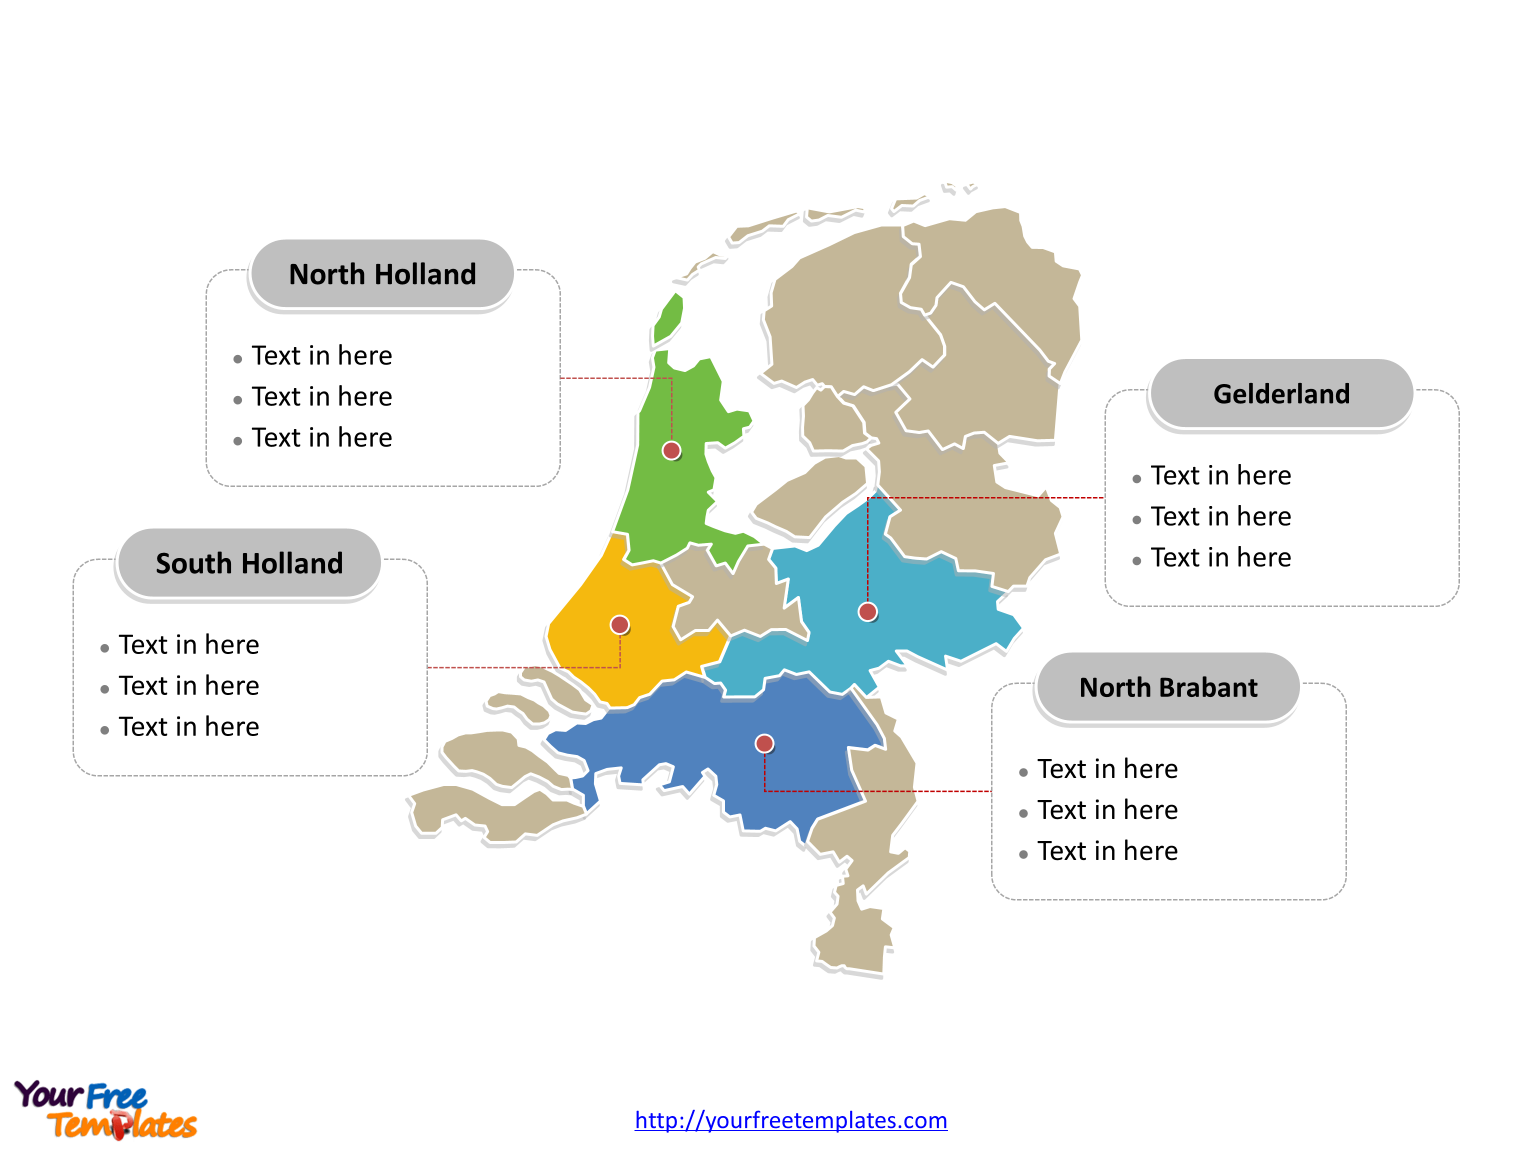 Netherlands Political map label with major administration districts